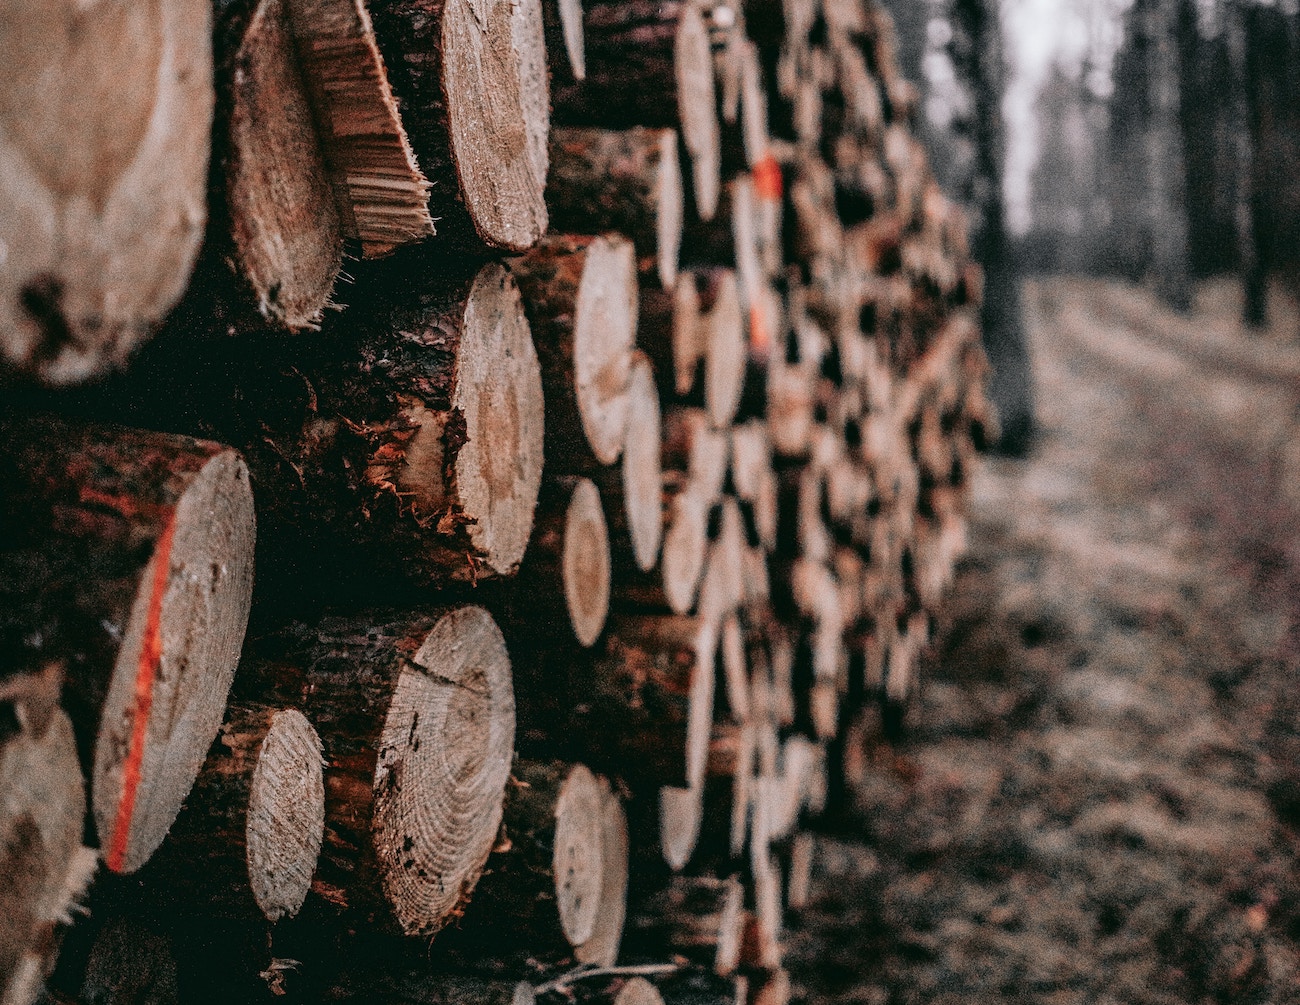 Lumber prices posted a 25 percent increase in January 2019, but analysts warn that the market may be overbought, and conditions are similar to last year when prices hit an all-time high and then fell.